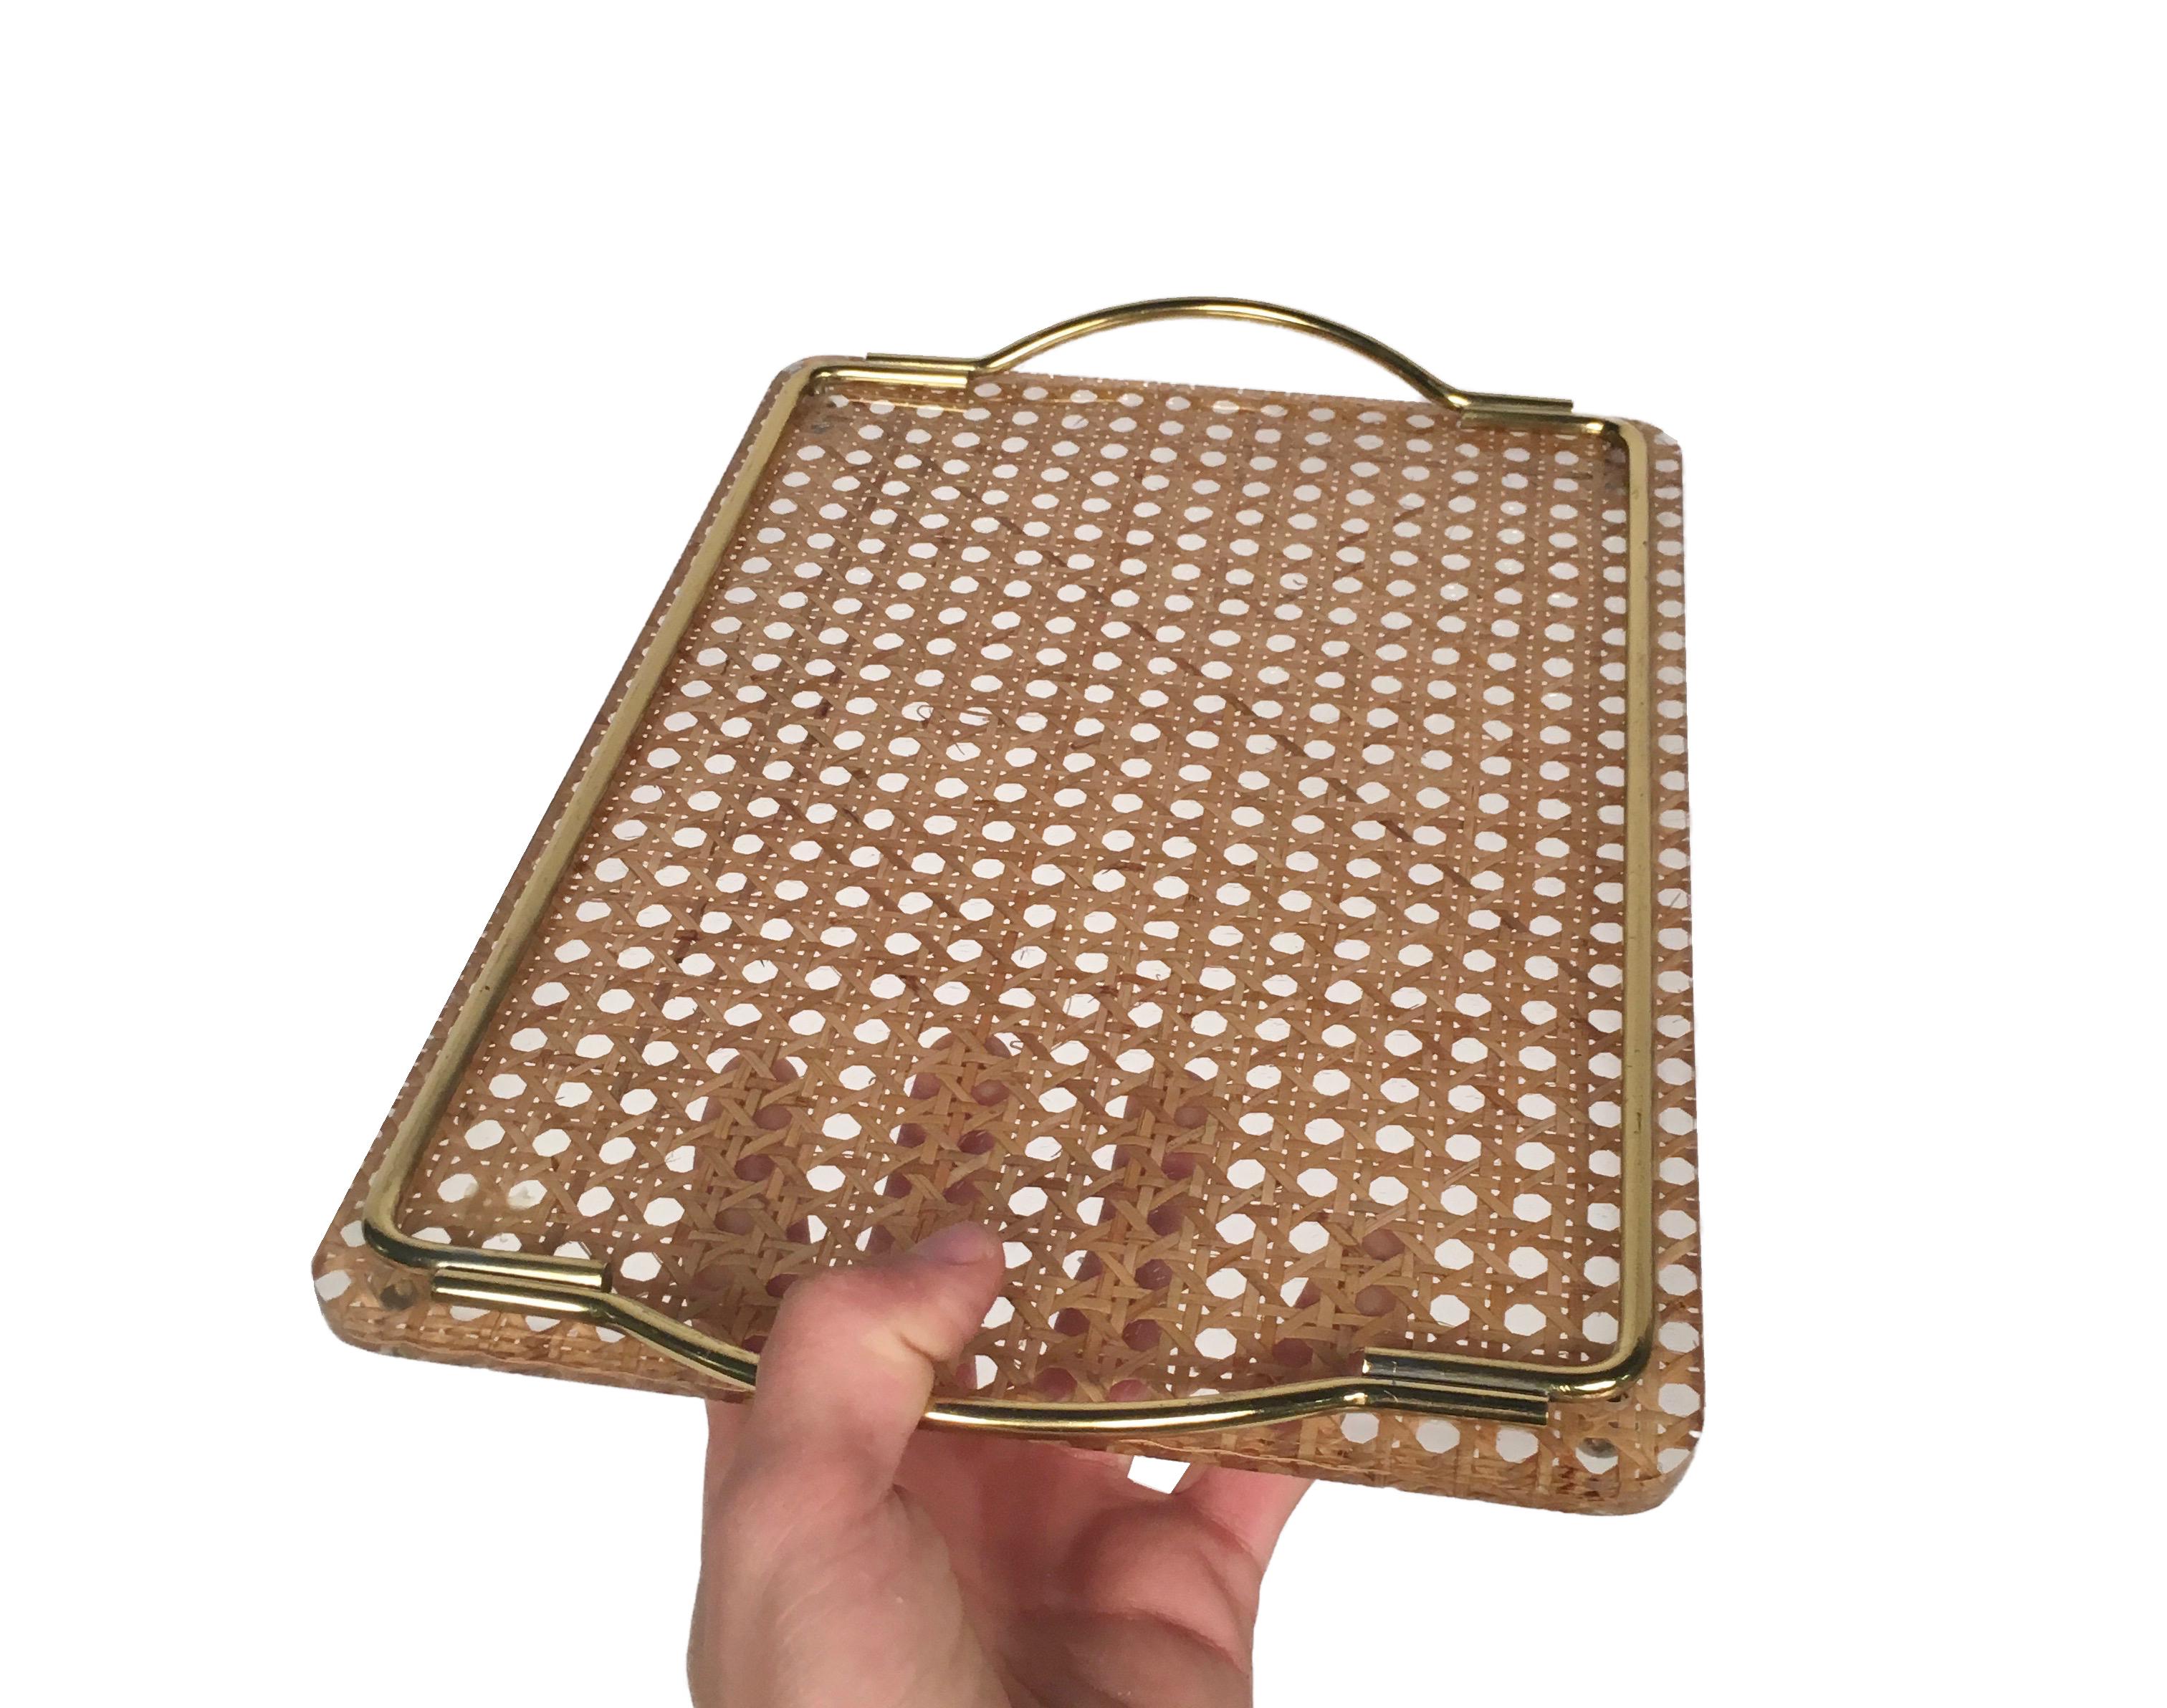 Mid-Century Modern Midcentury Brass, Lucite and Rattan Serving Tray Christian Dior Home Collection